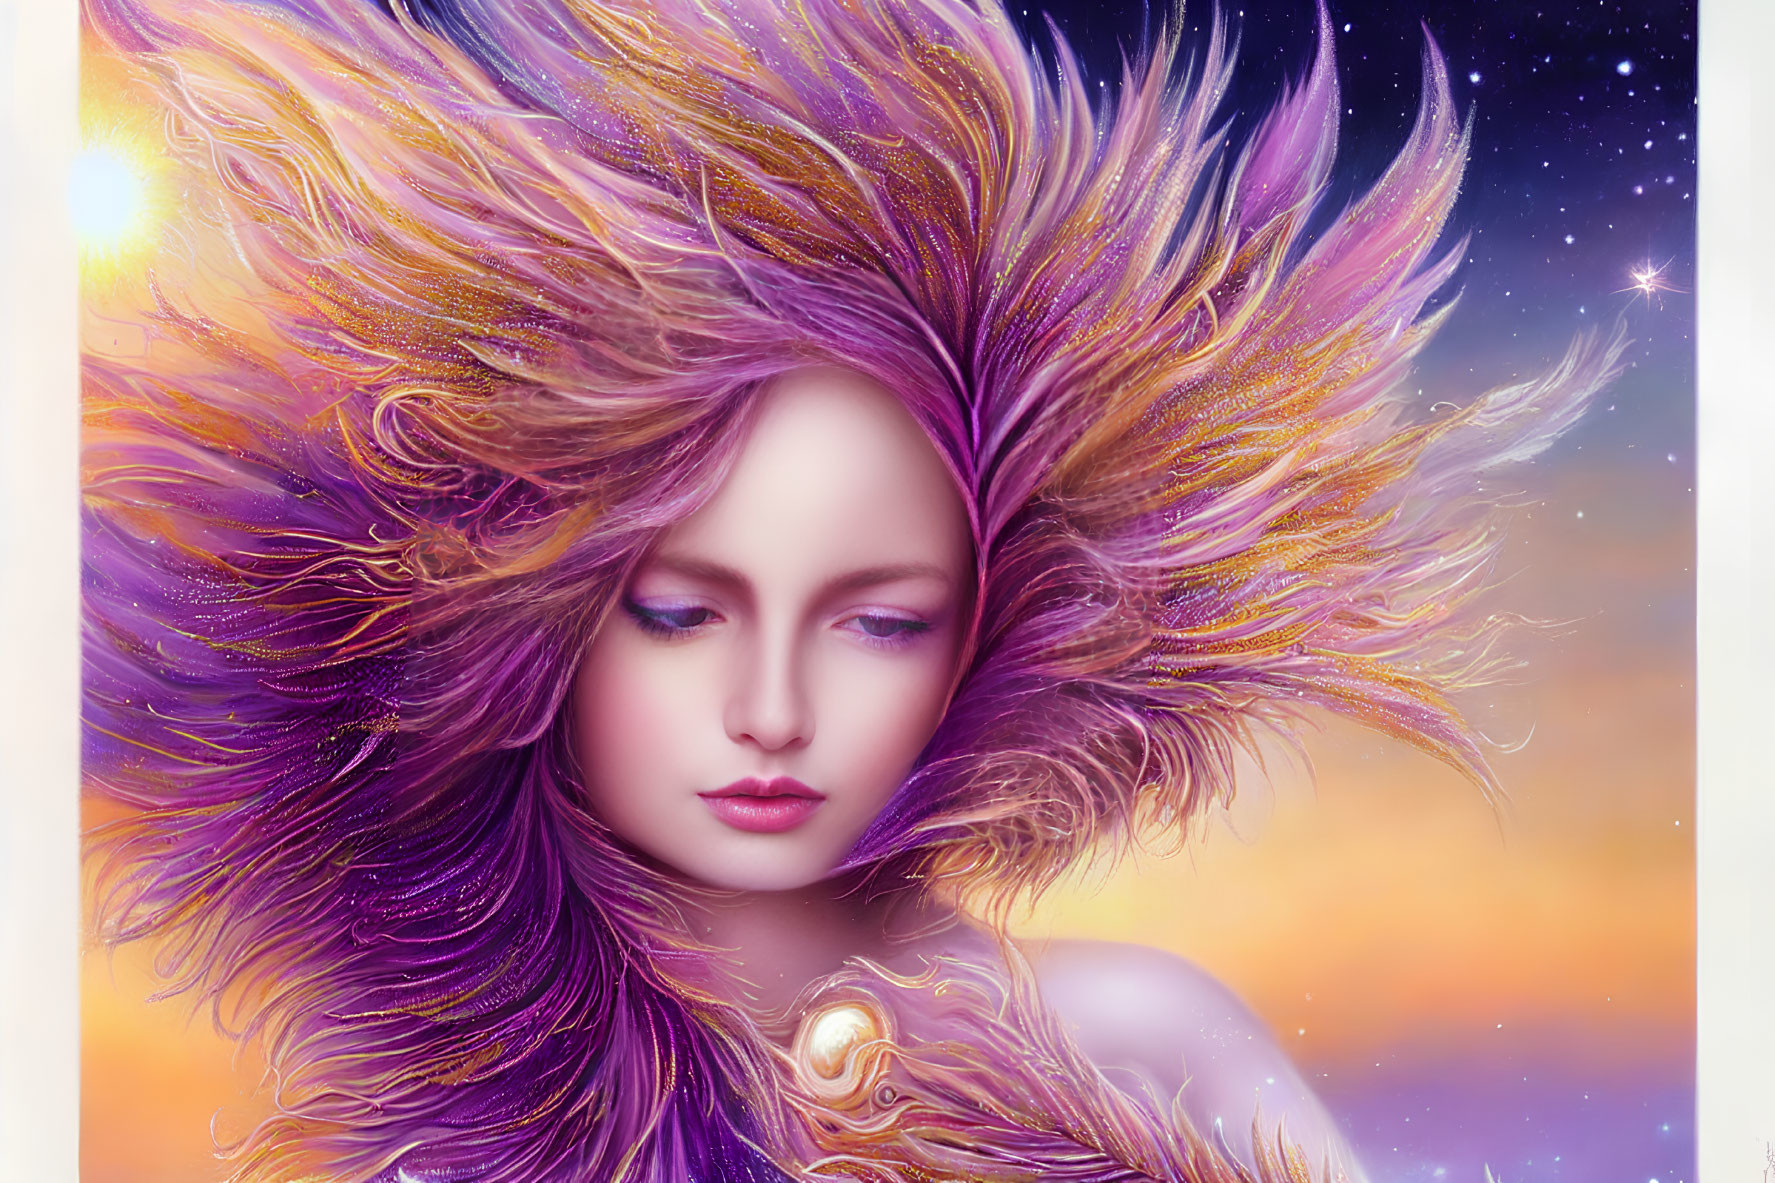 Ethereal woman with flowing purple hair in cosmic background